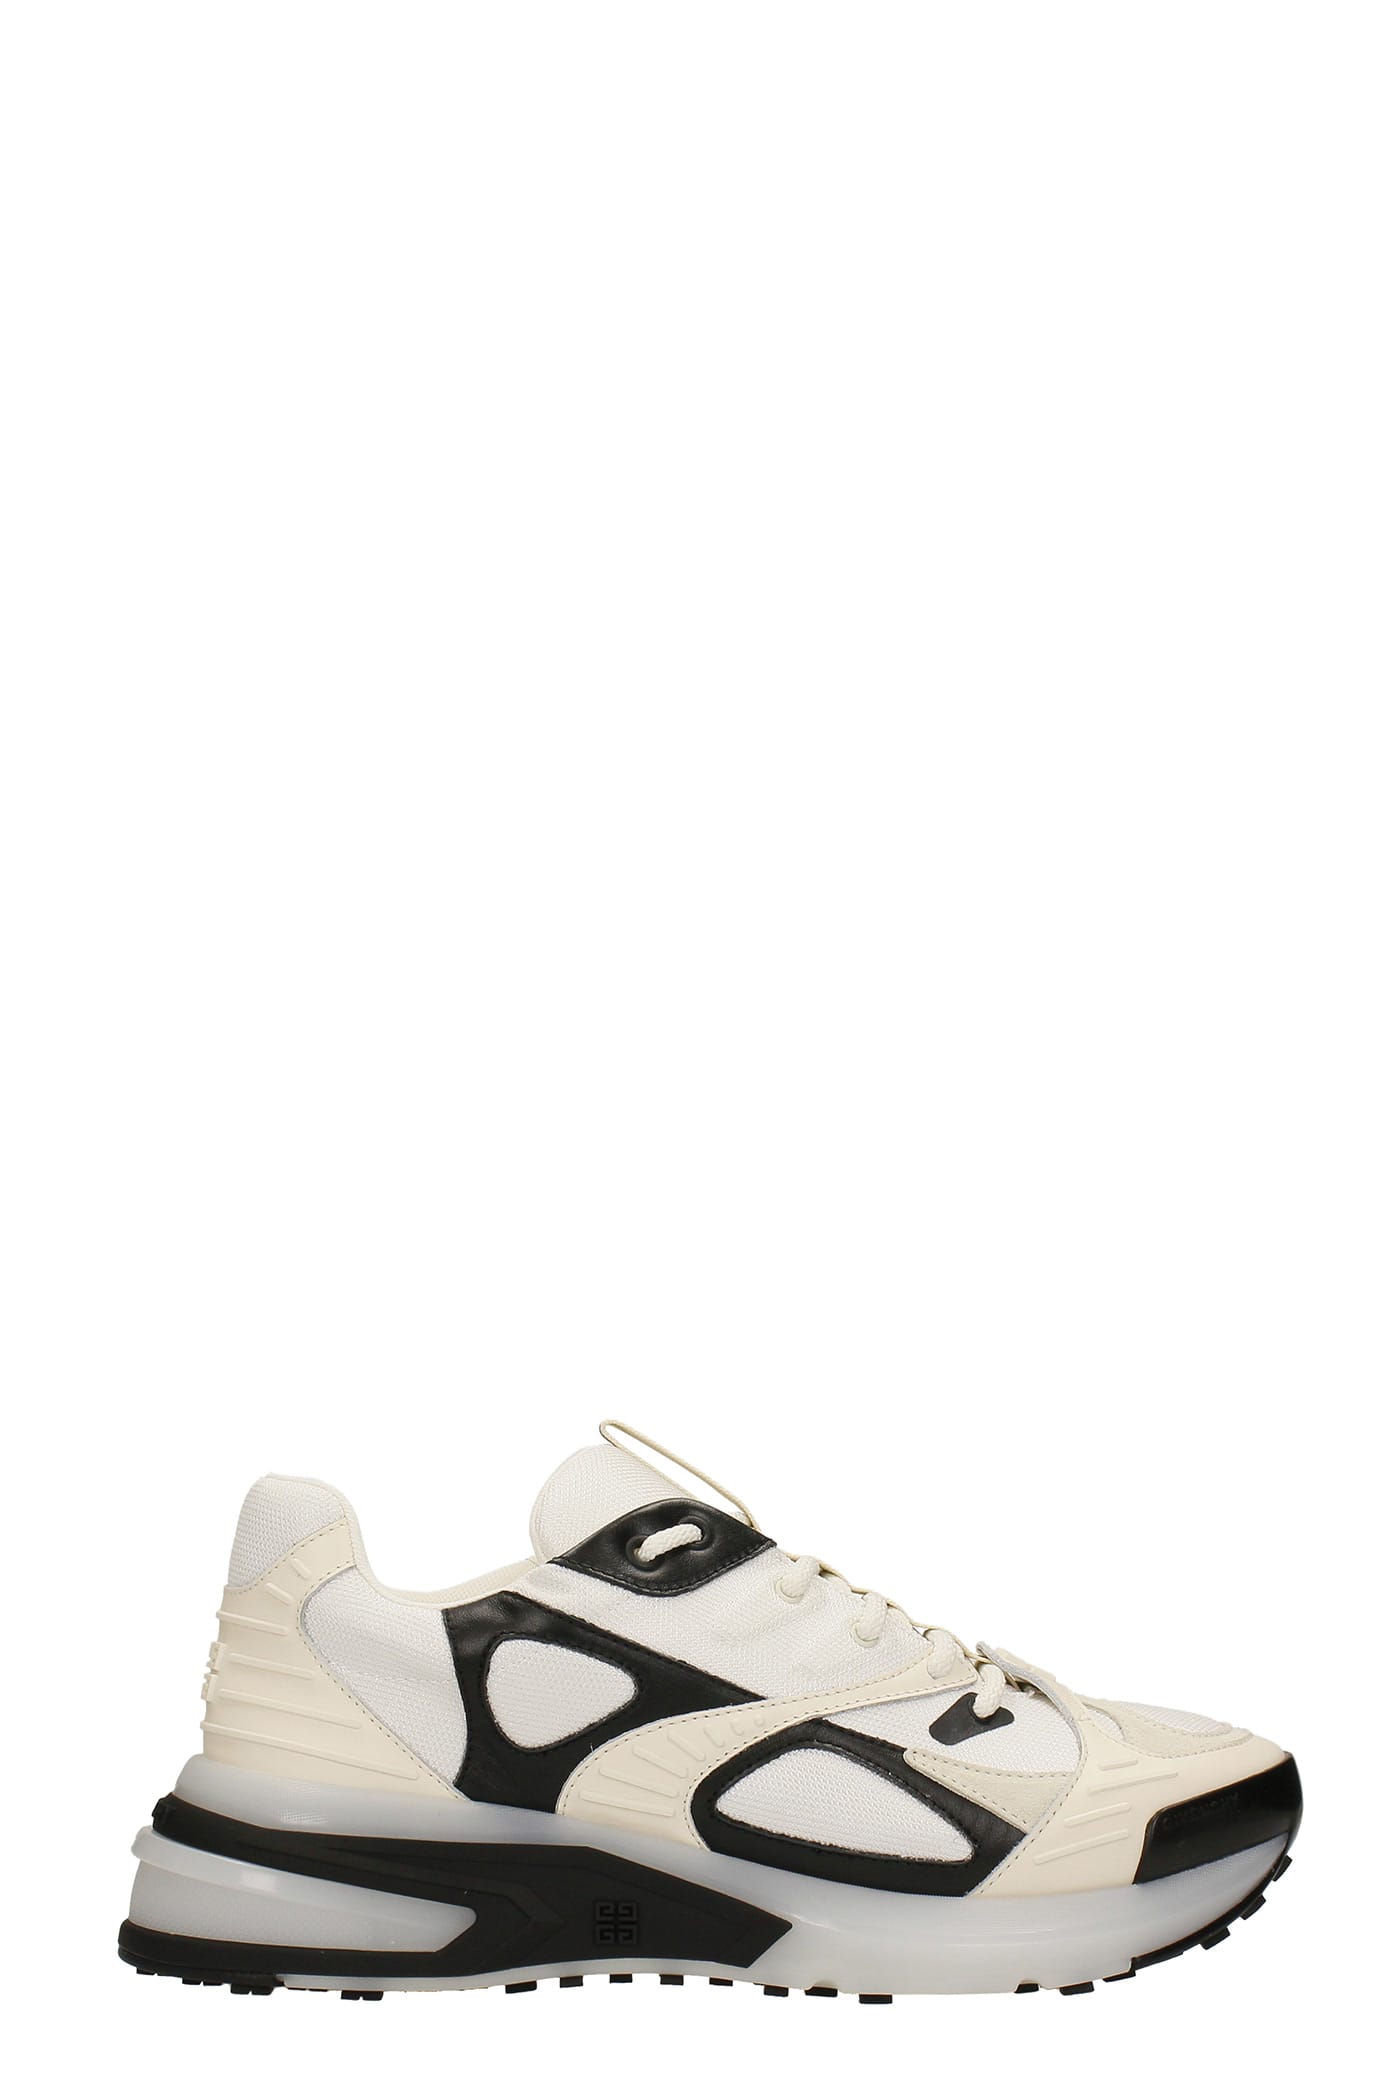 Givenchy Giv 1tr Sneakers In Beige Synthetic Fibers